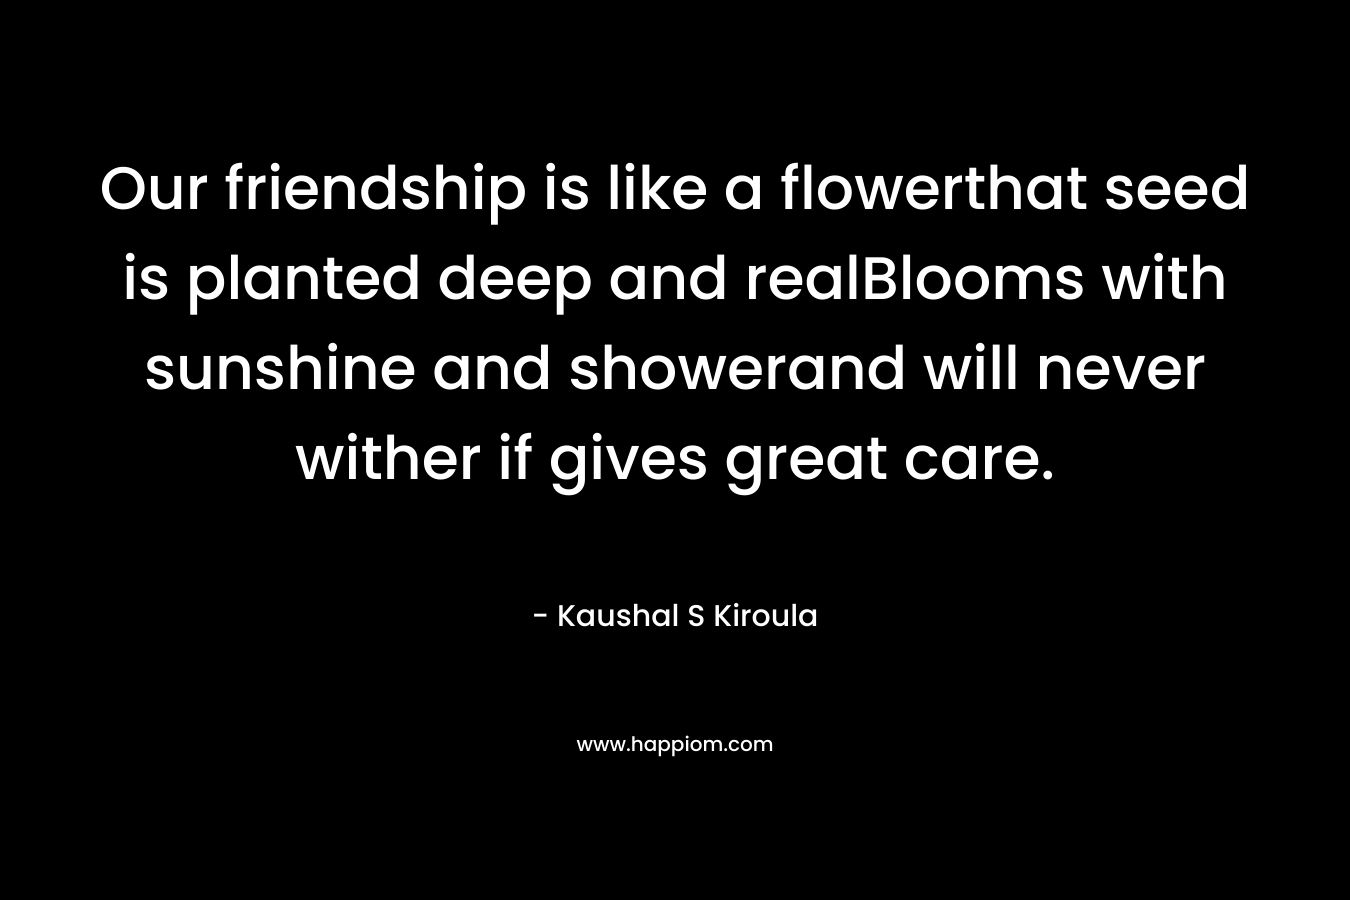 Our friendship is like a flowerthat seed is planted deep and realBlooms with sunshine and showerand will never wither if gives great care. – Kaushal S Kiroula